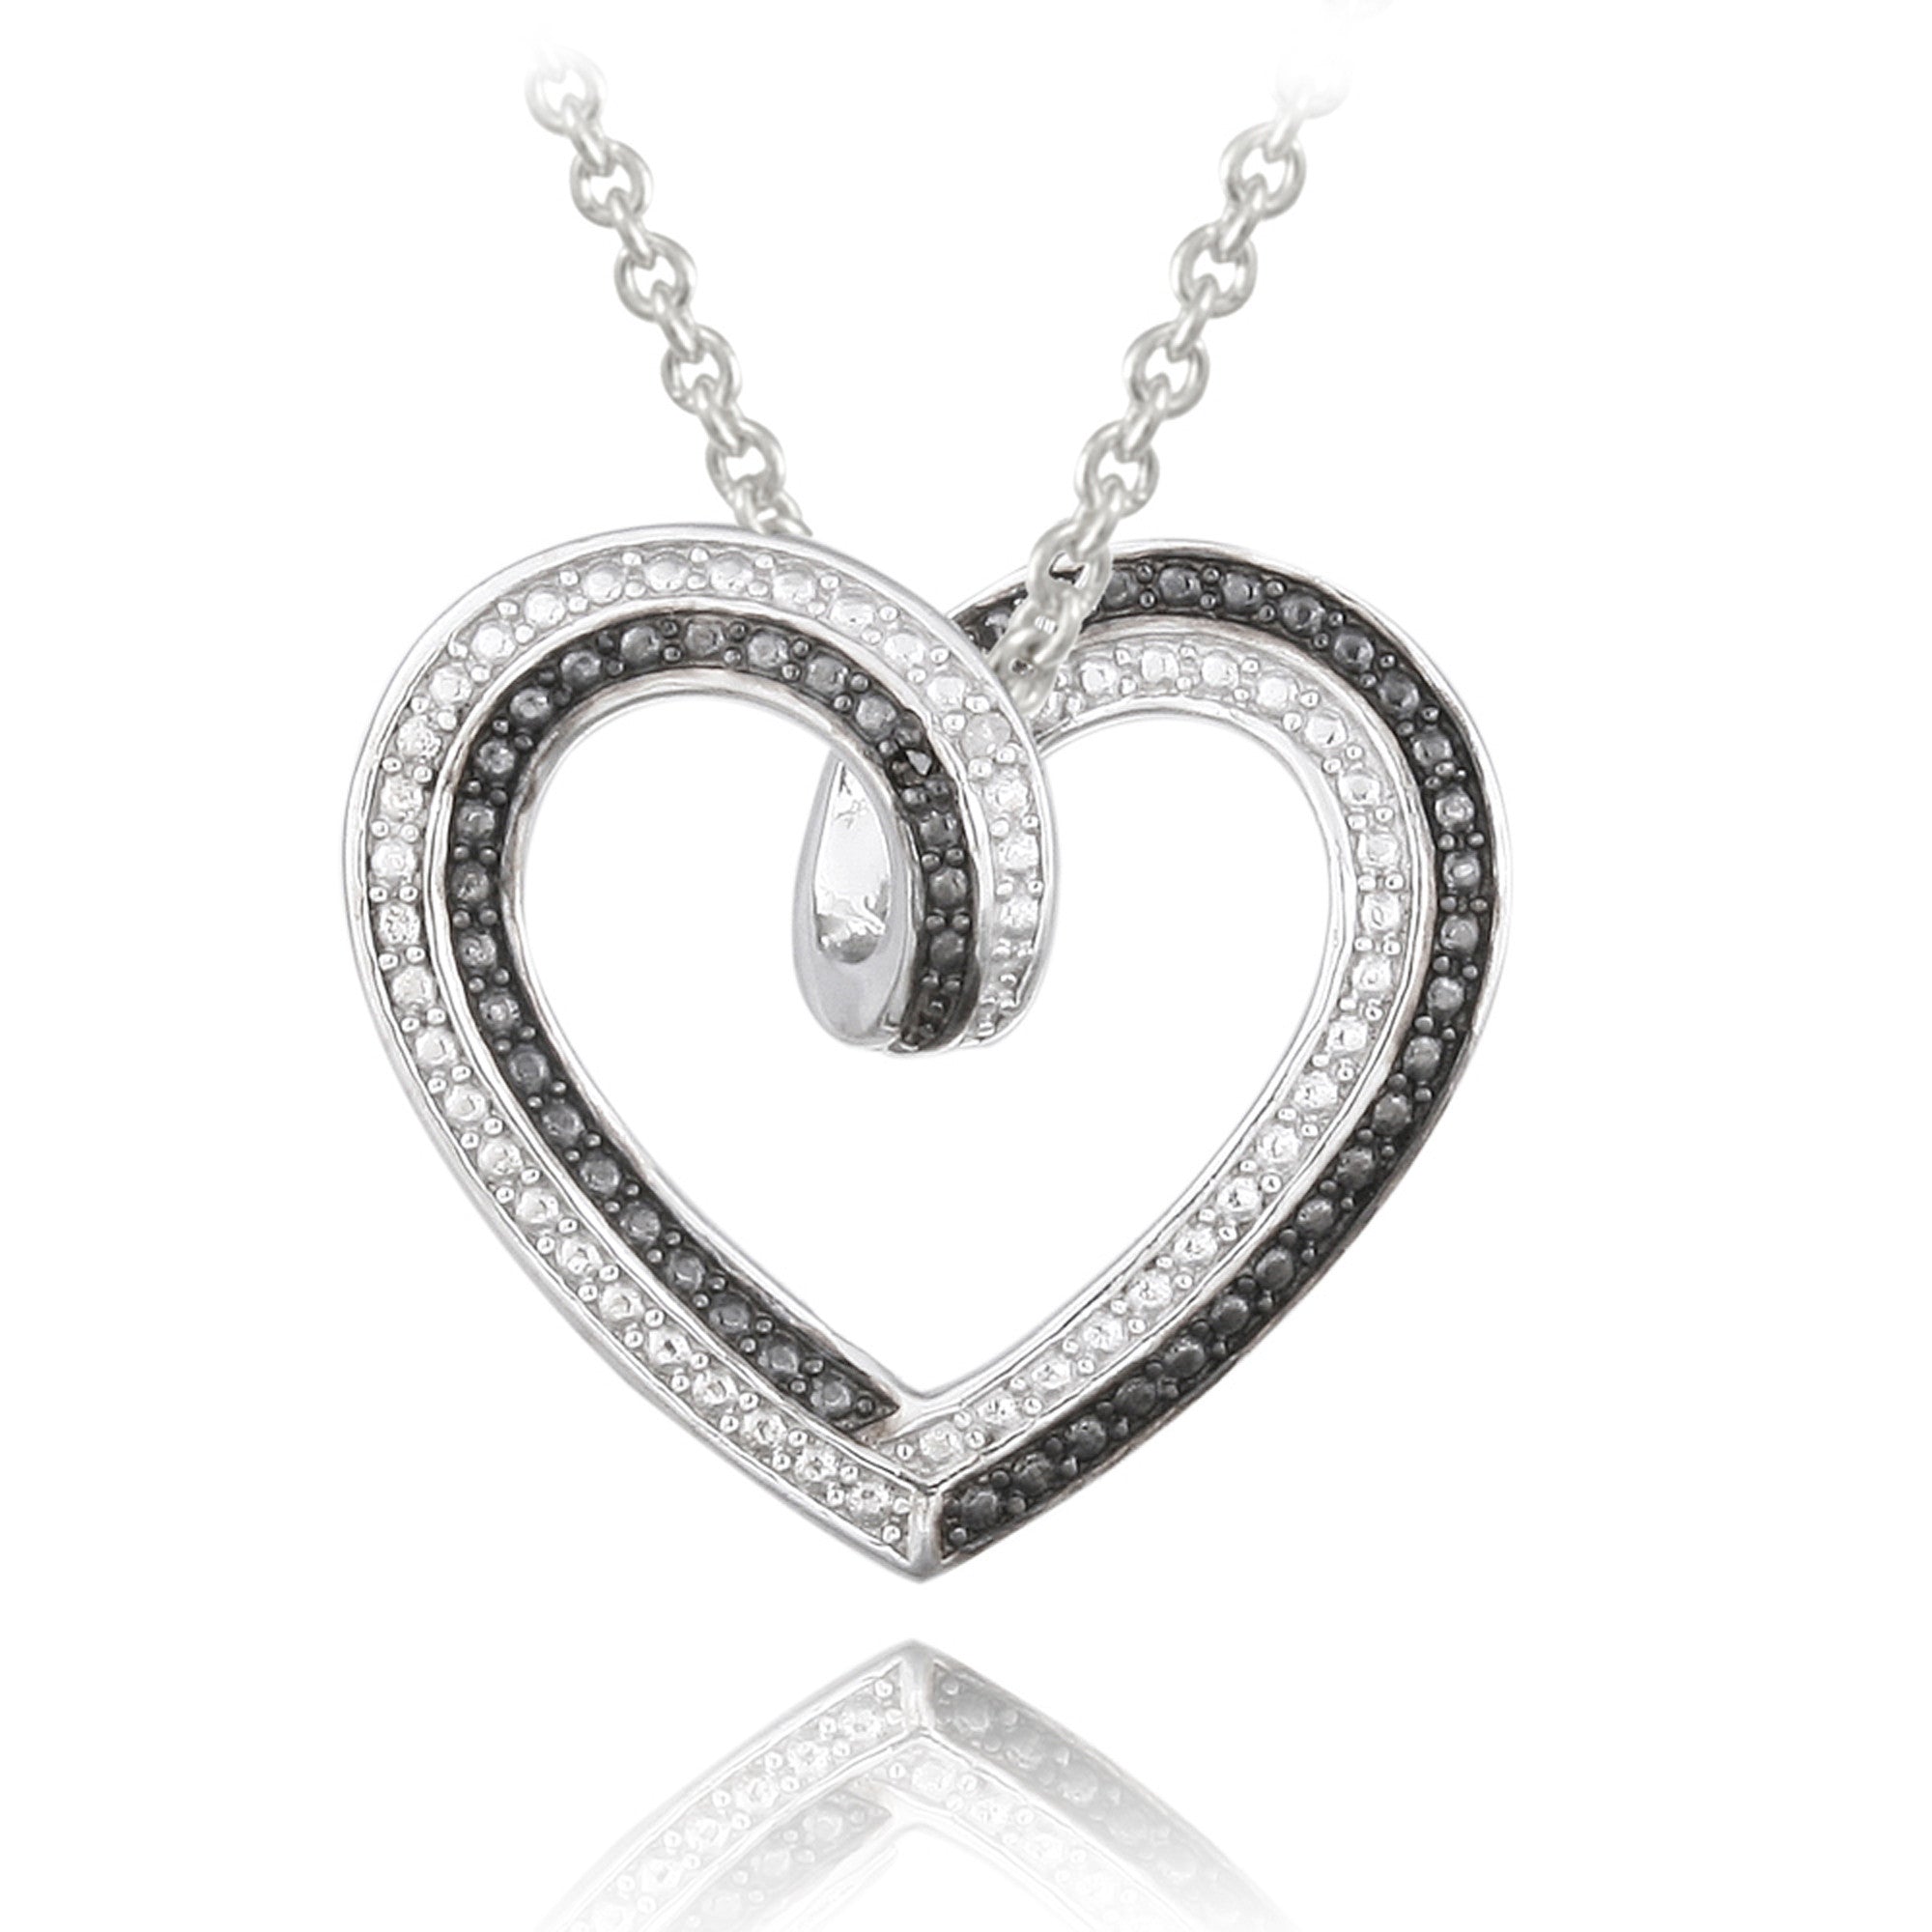 Reversible Heart Necklace With Black & White Diamond Accents